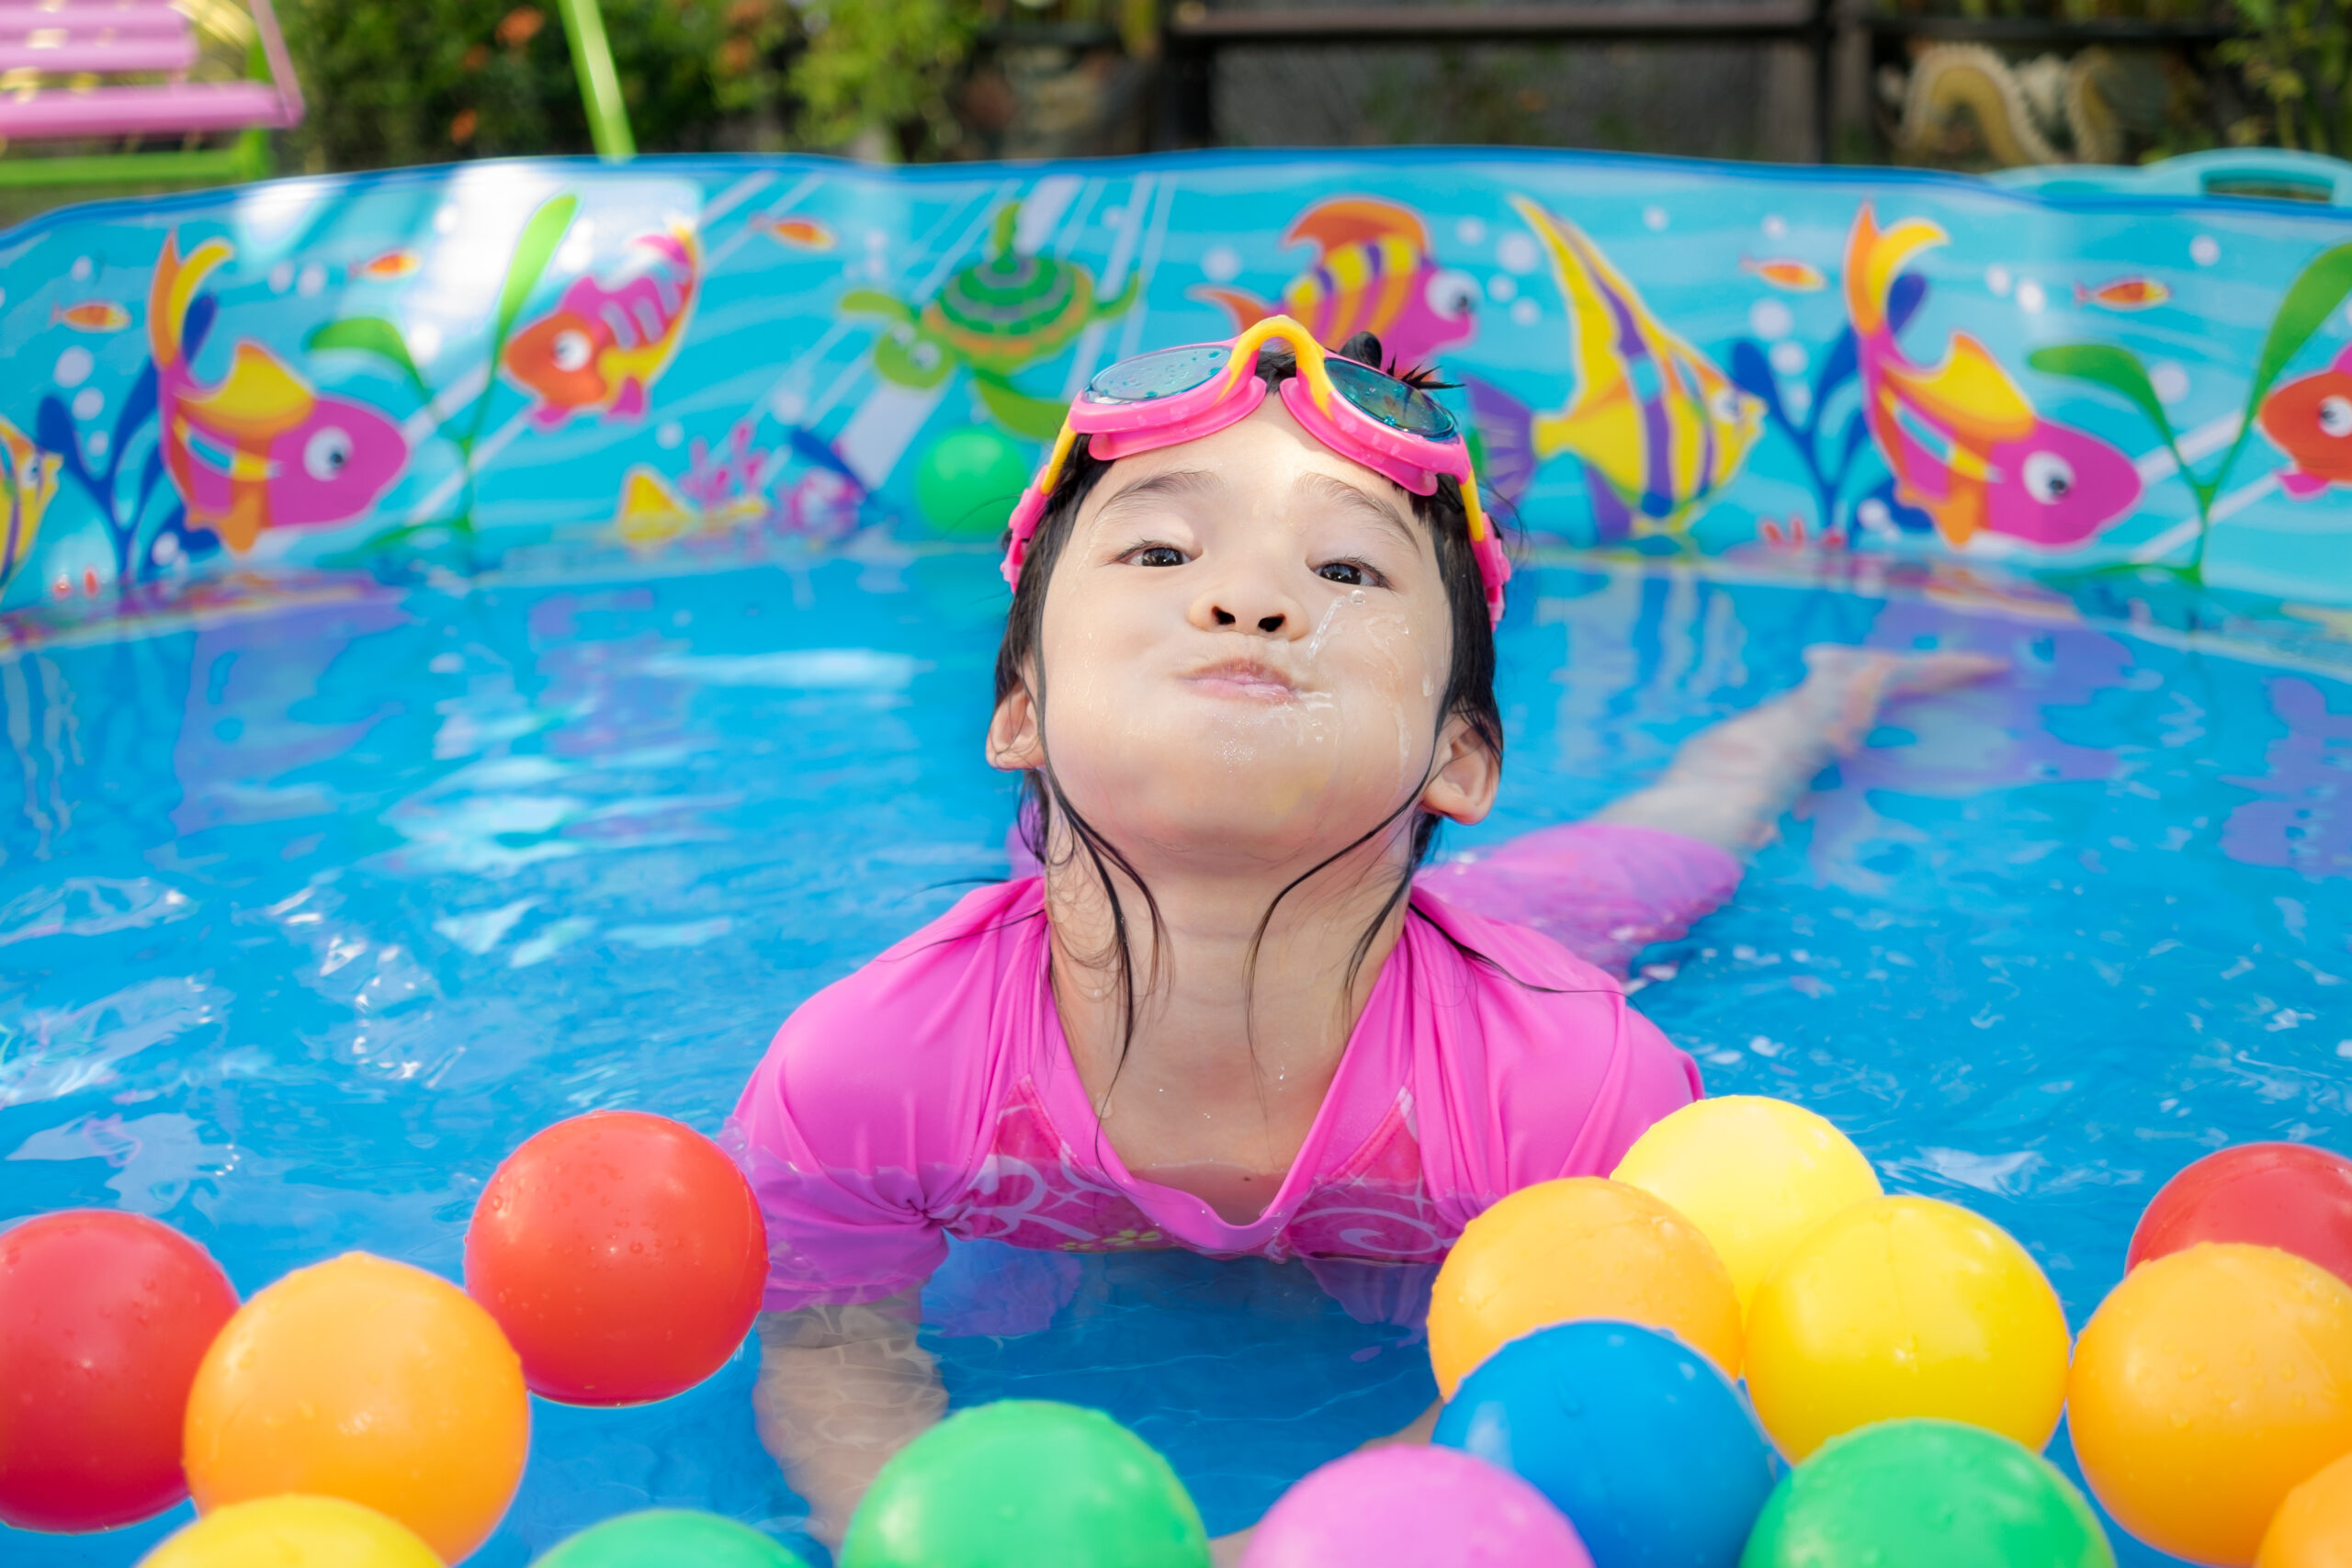 A child gleefully enjoying a pool filled with colorful balls, experiencing a playful and vibrant aquatic activity.